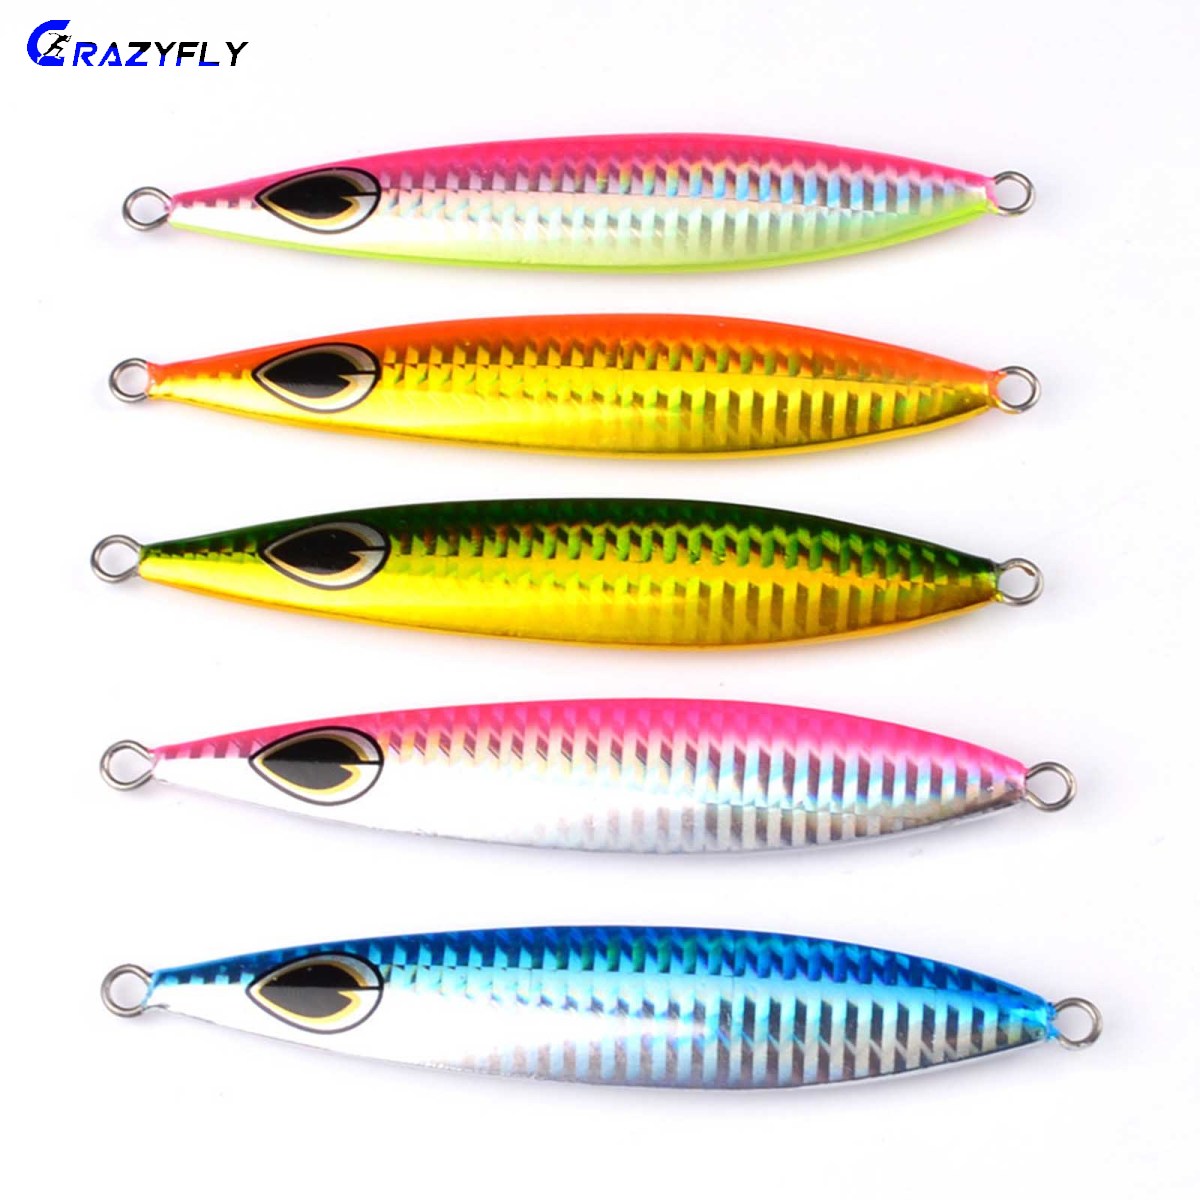 Details about   10*Metal Jigs Butterfly Fishing Lures Crankbaits Snapper Jigging Slow Lures 8.5g 